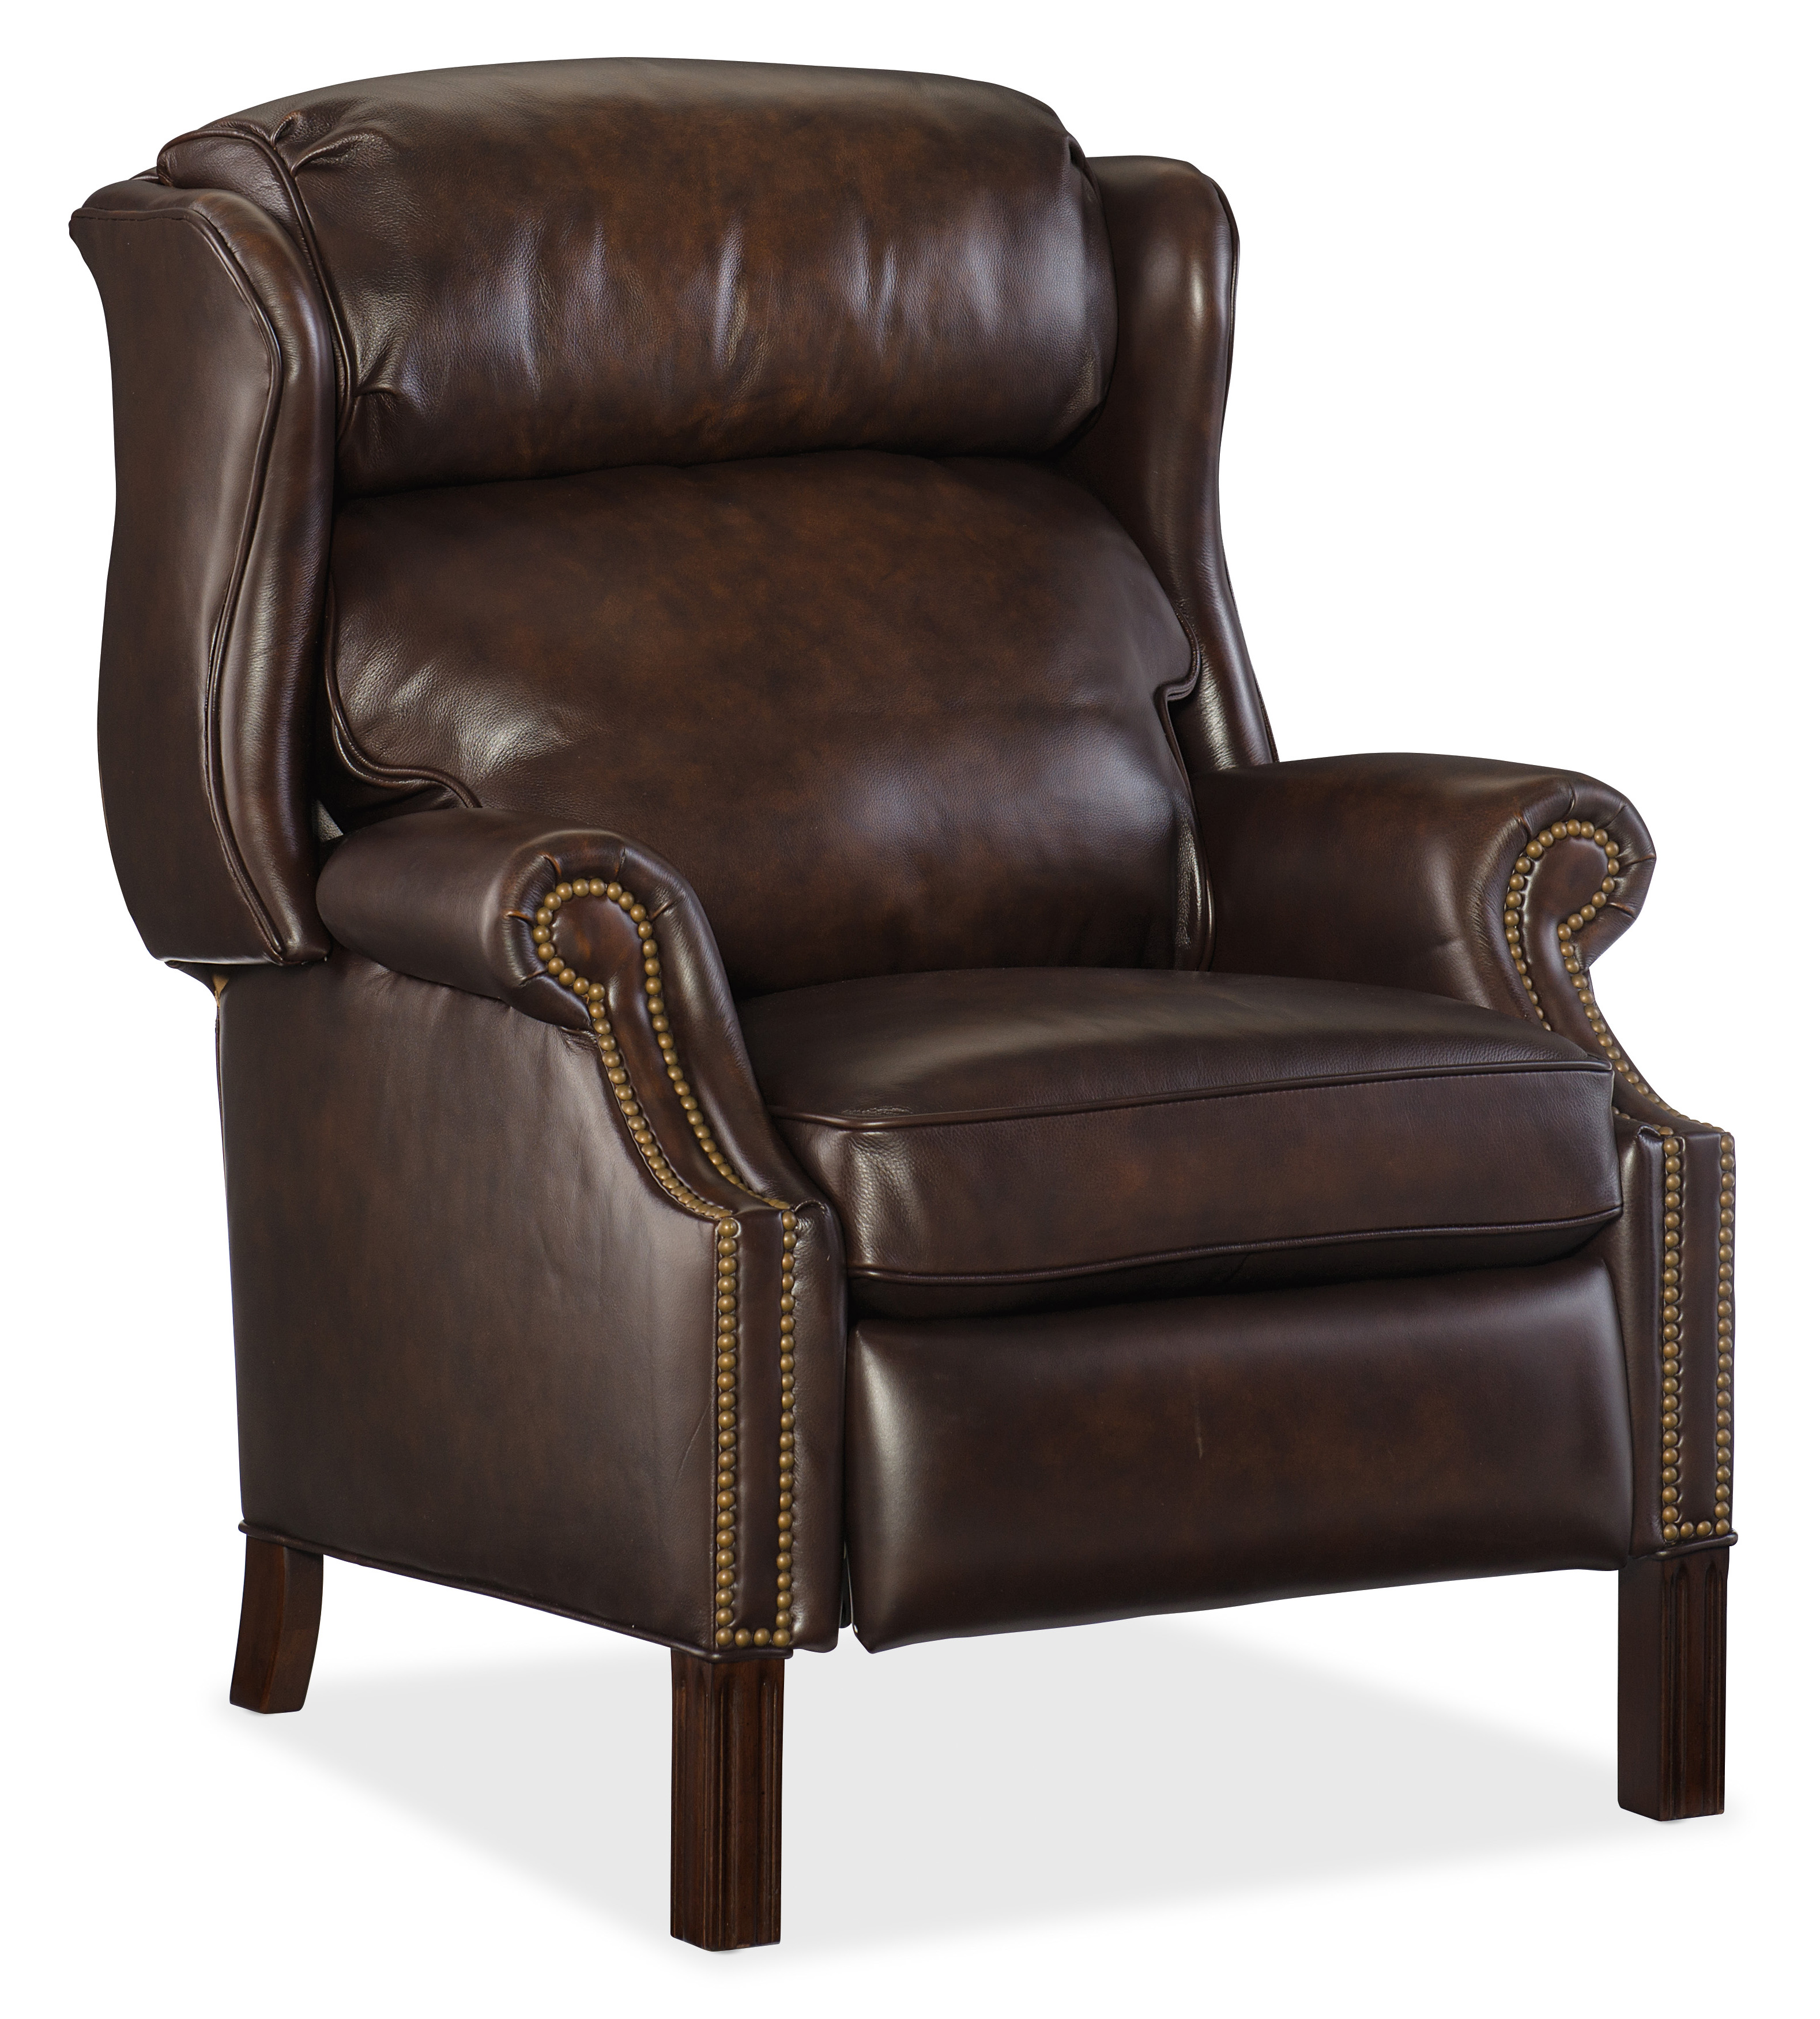 Picture of Finley Recliner Chair